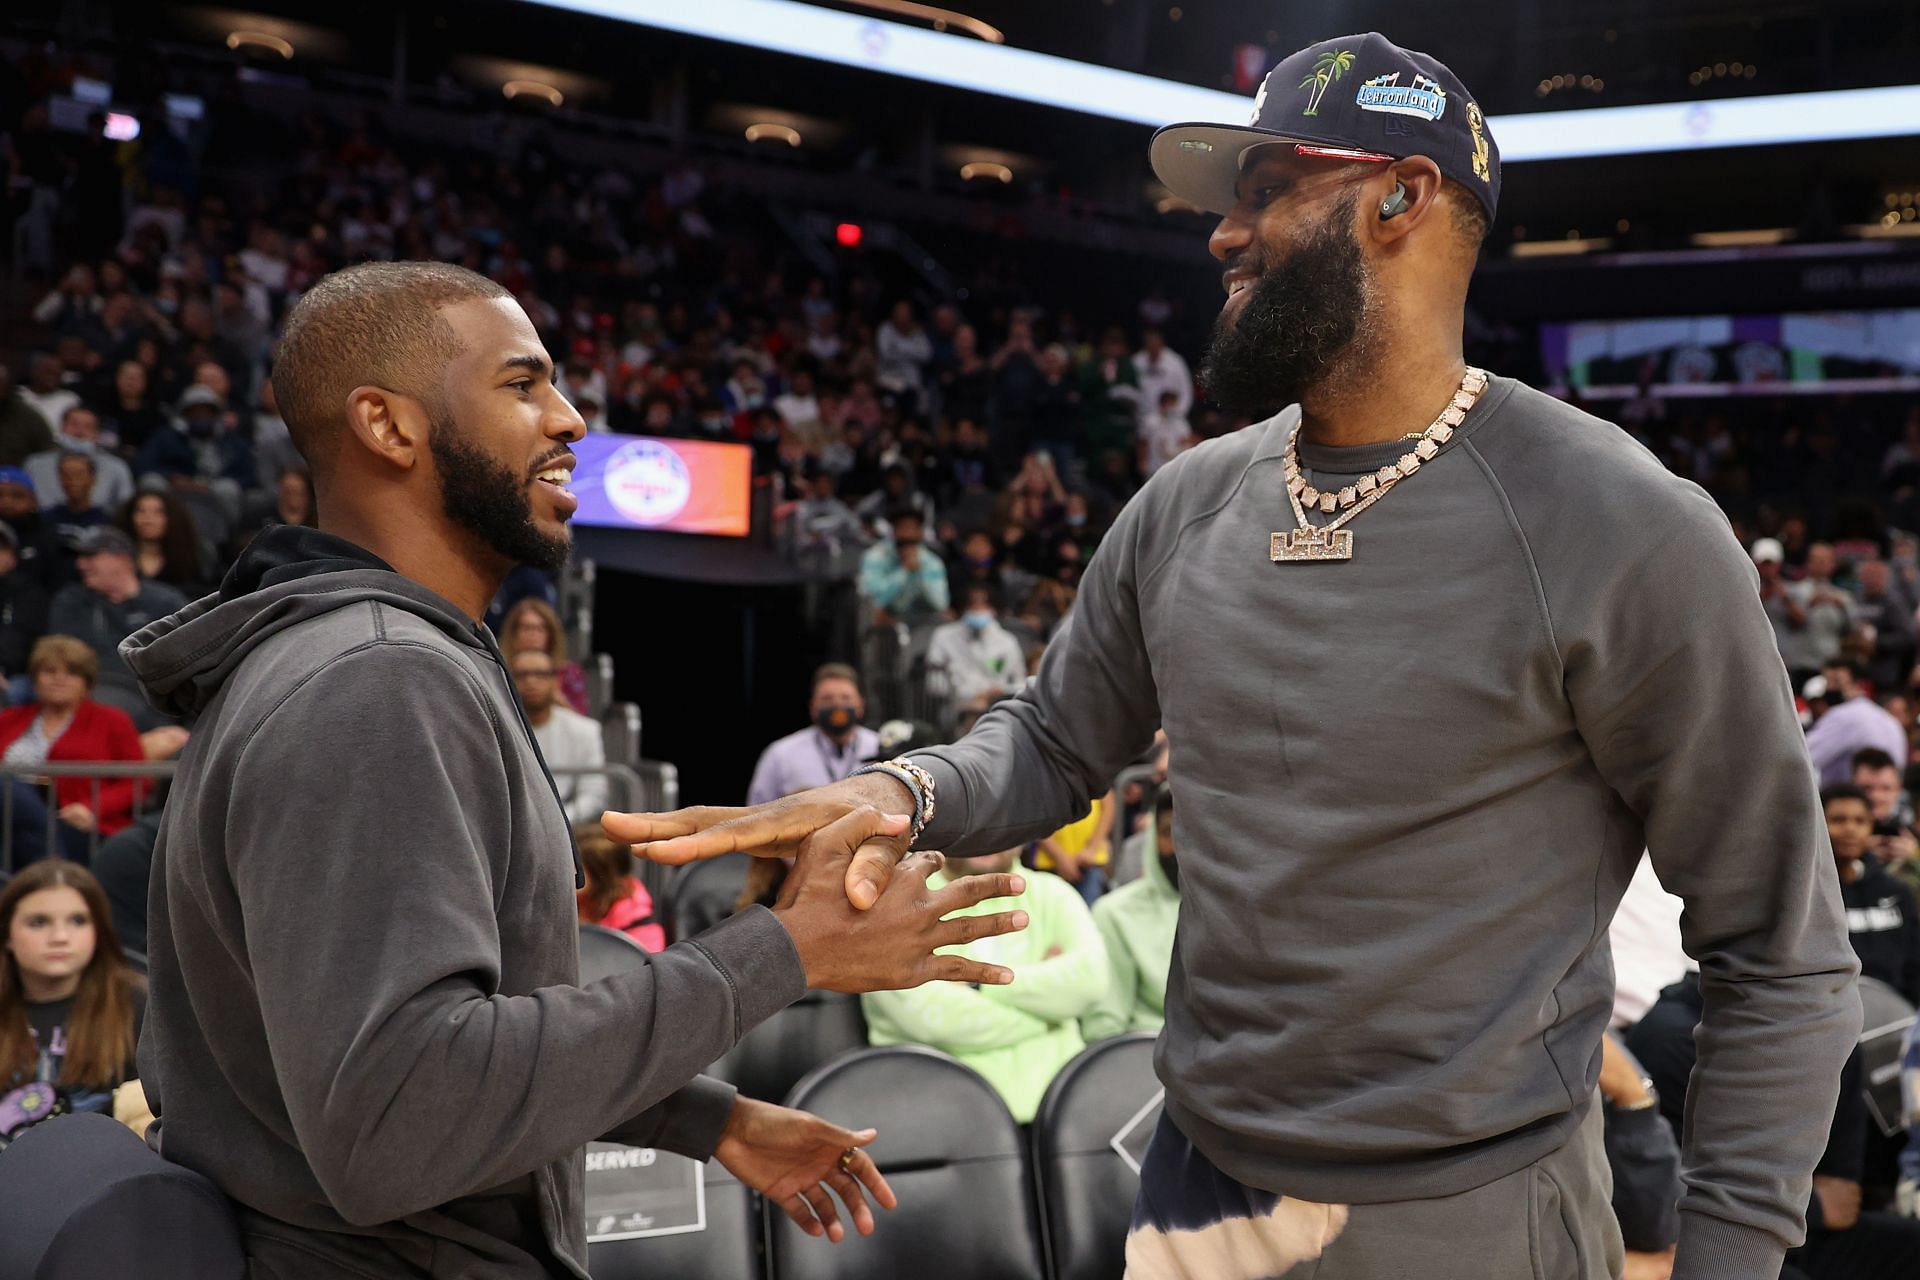 Chris Paul of the Phoenix Suns and LeBron James of the LA Lakers high five.